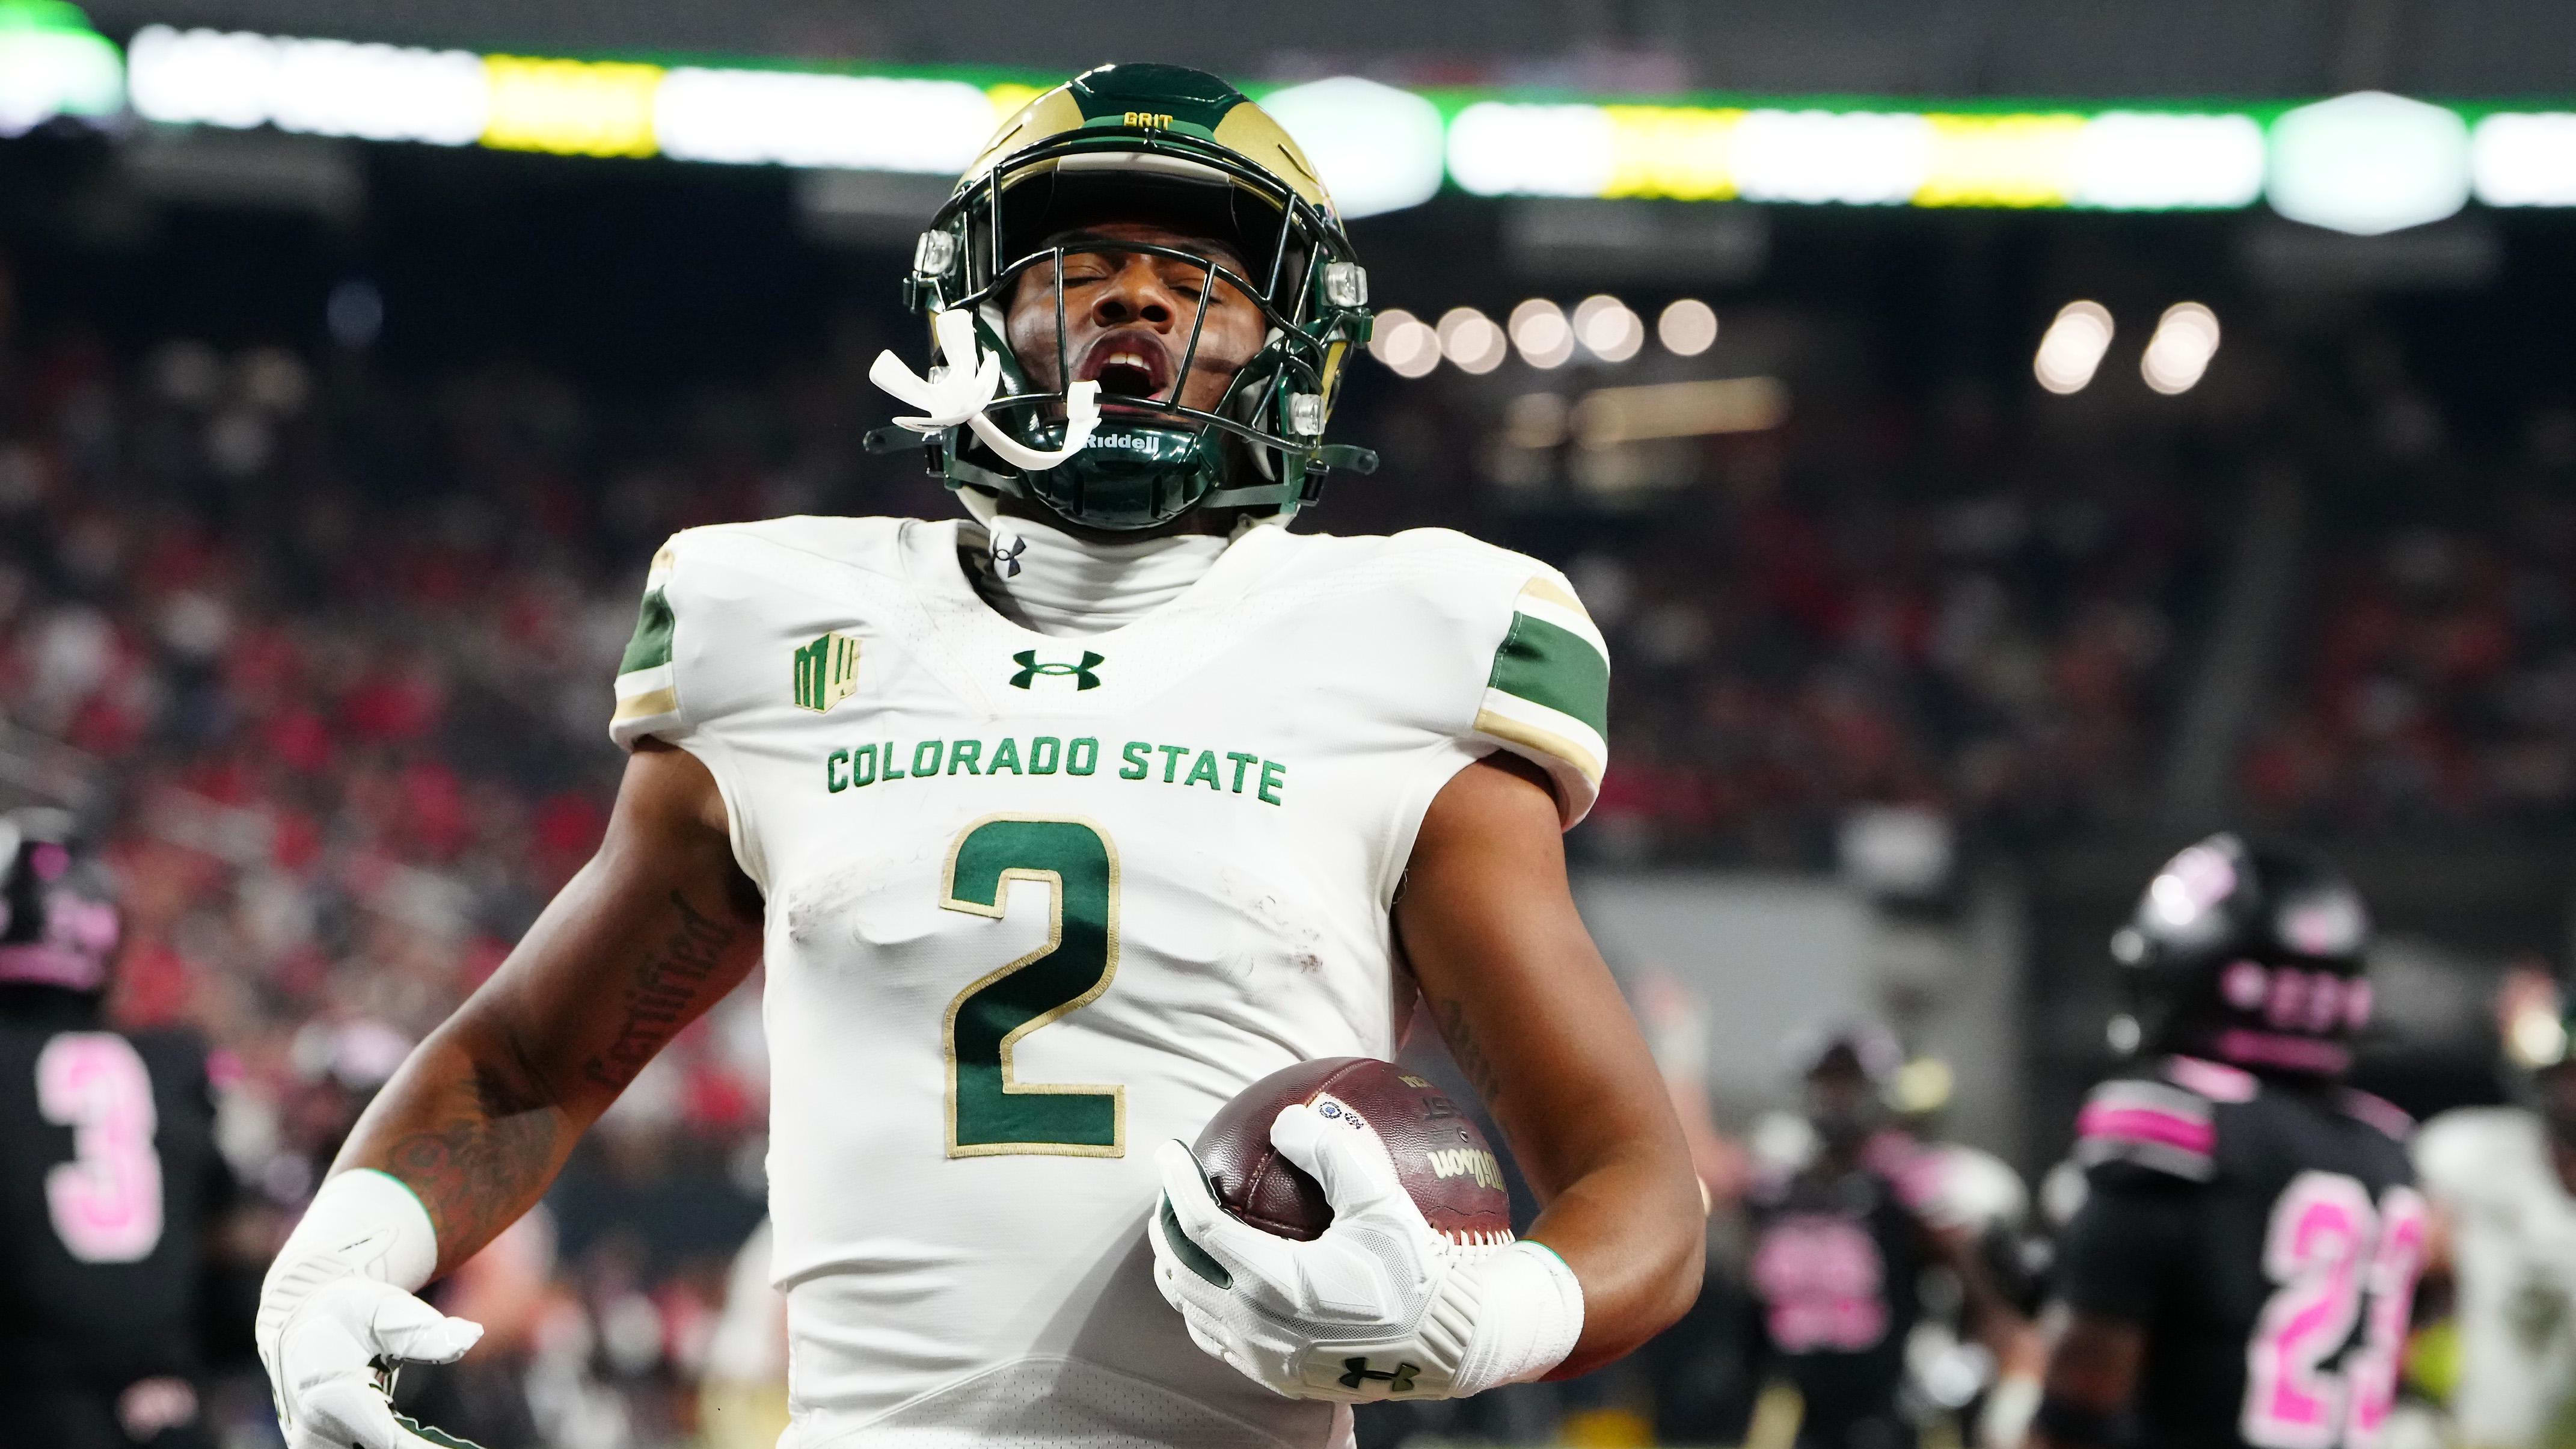 The Pitt Panthers have contacted three transfer WRs, including Colorado State's Justus Ross Simmons